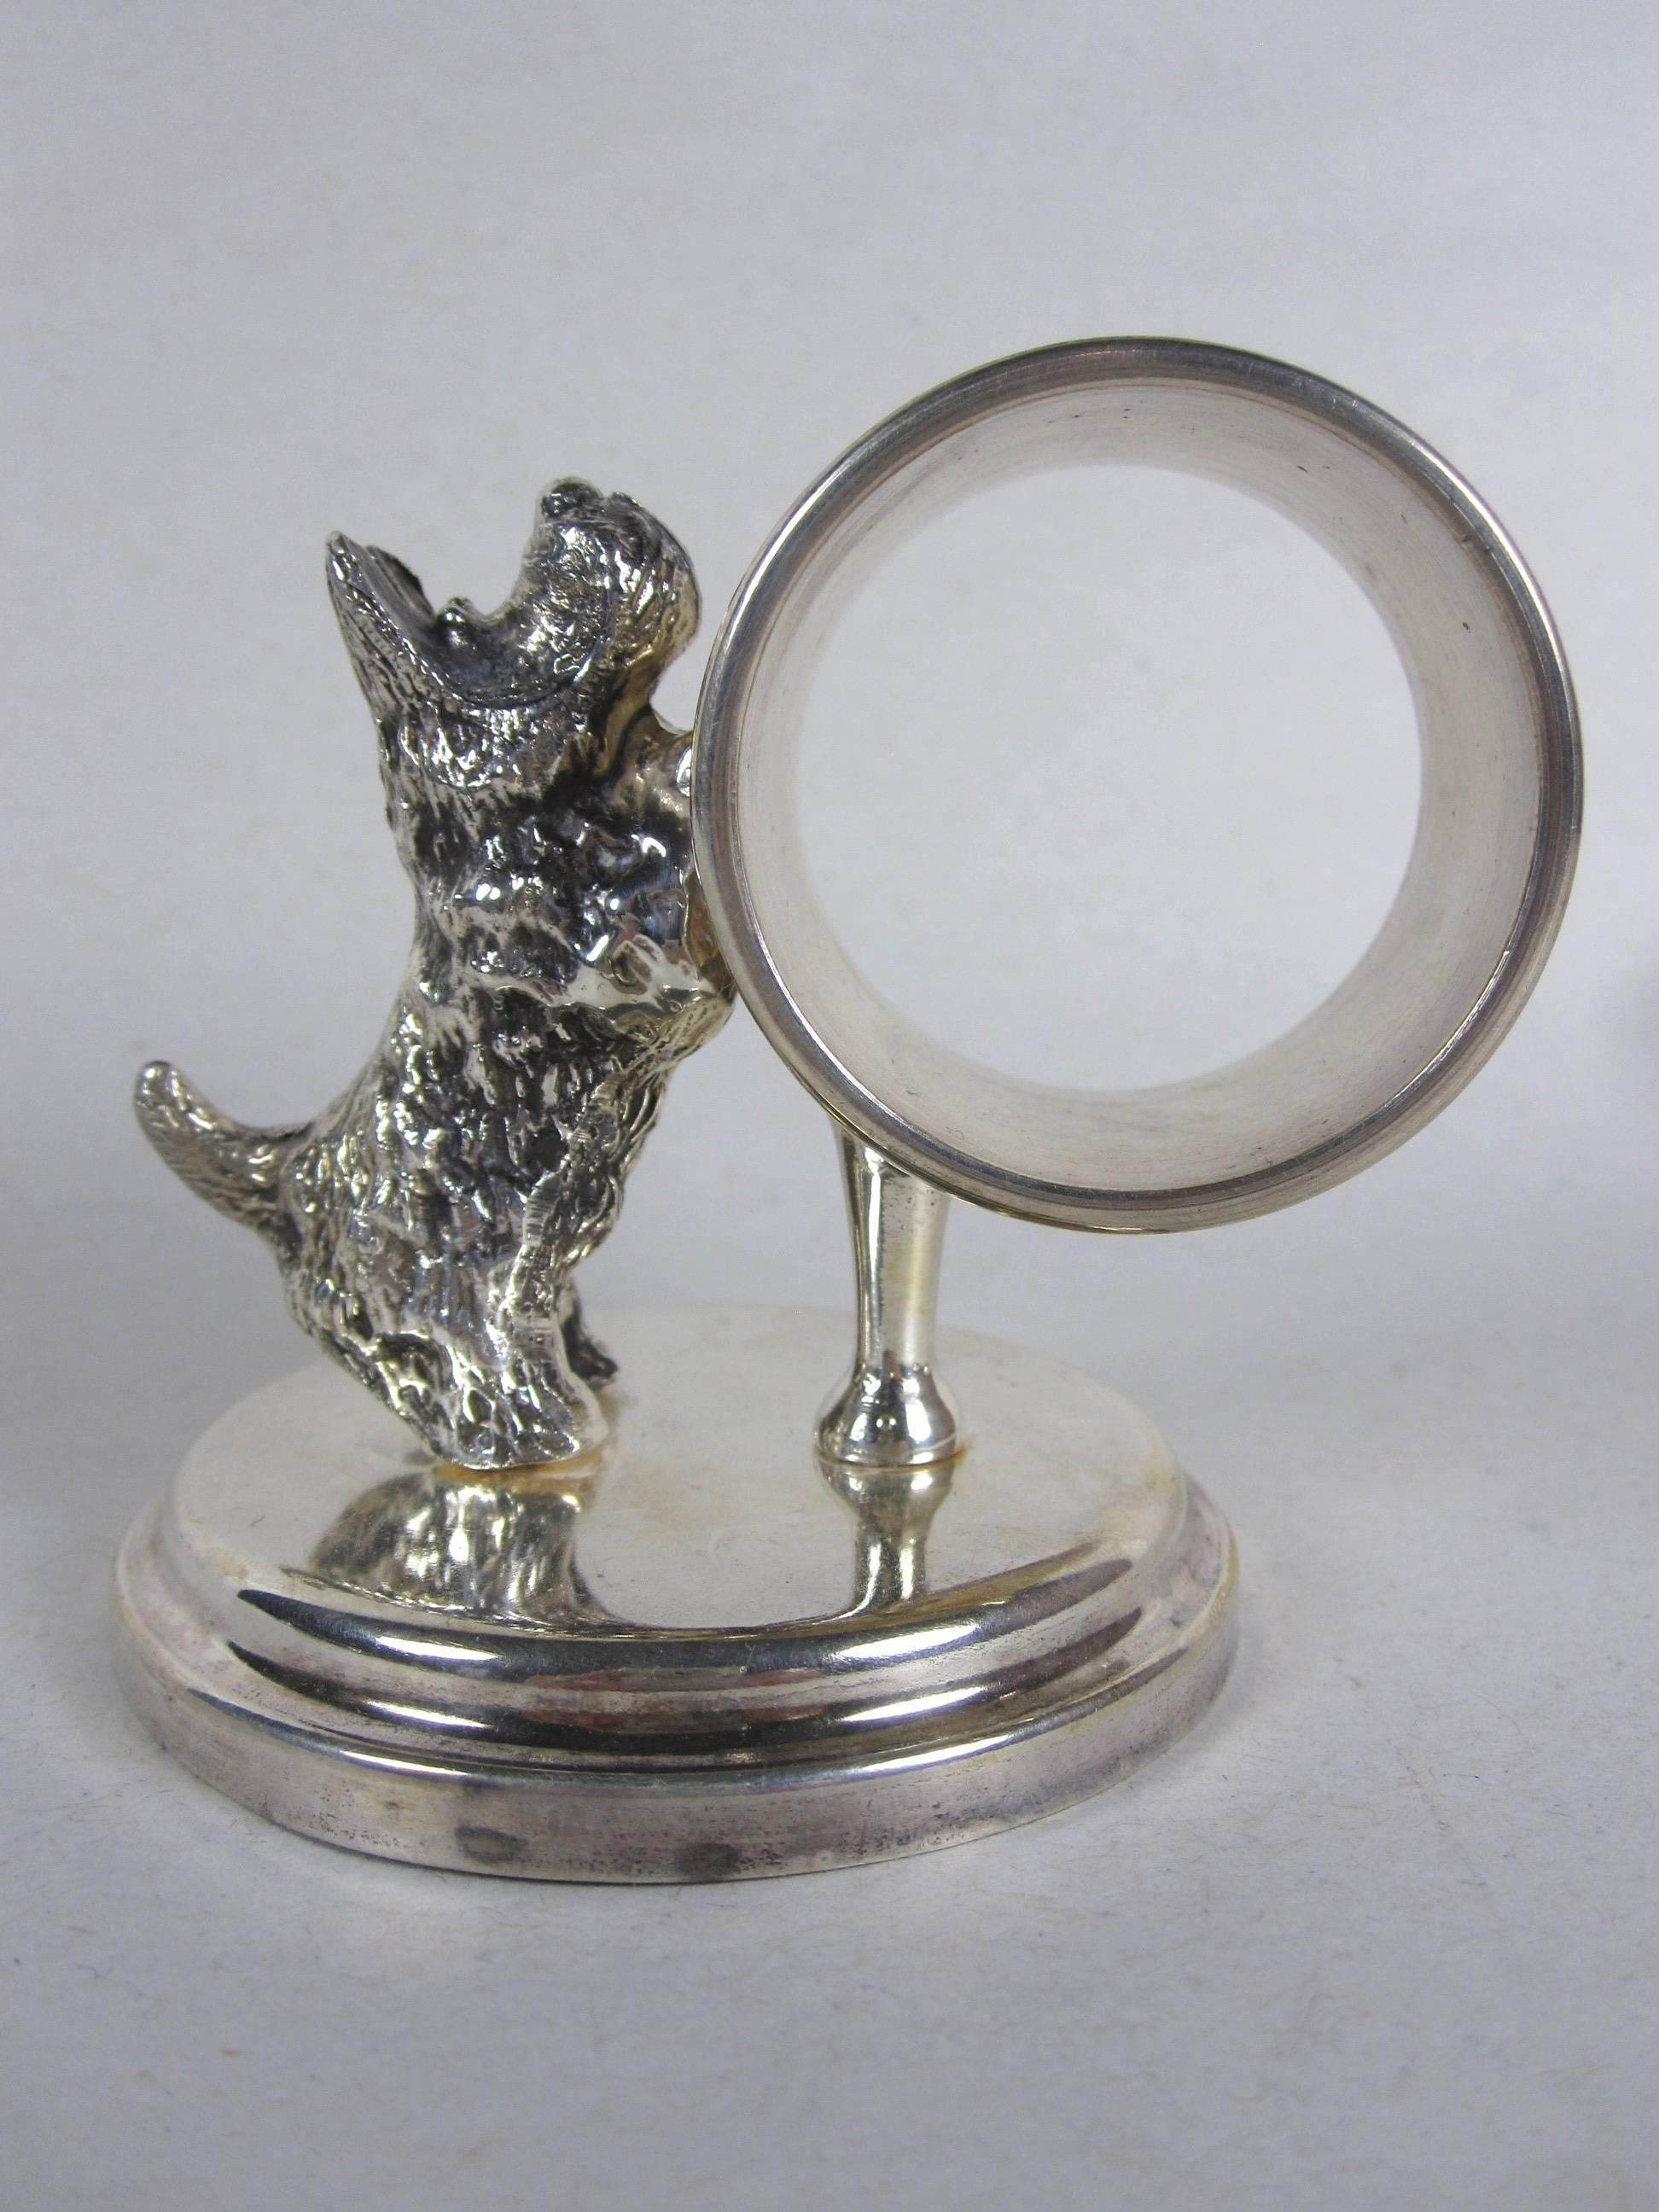 Antique Victorian Silver Plate Scotty Dog and Barrel Standing Napkin Ring Holder 1